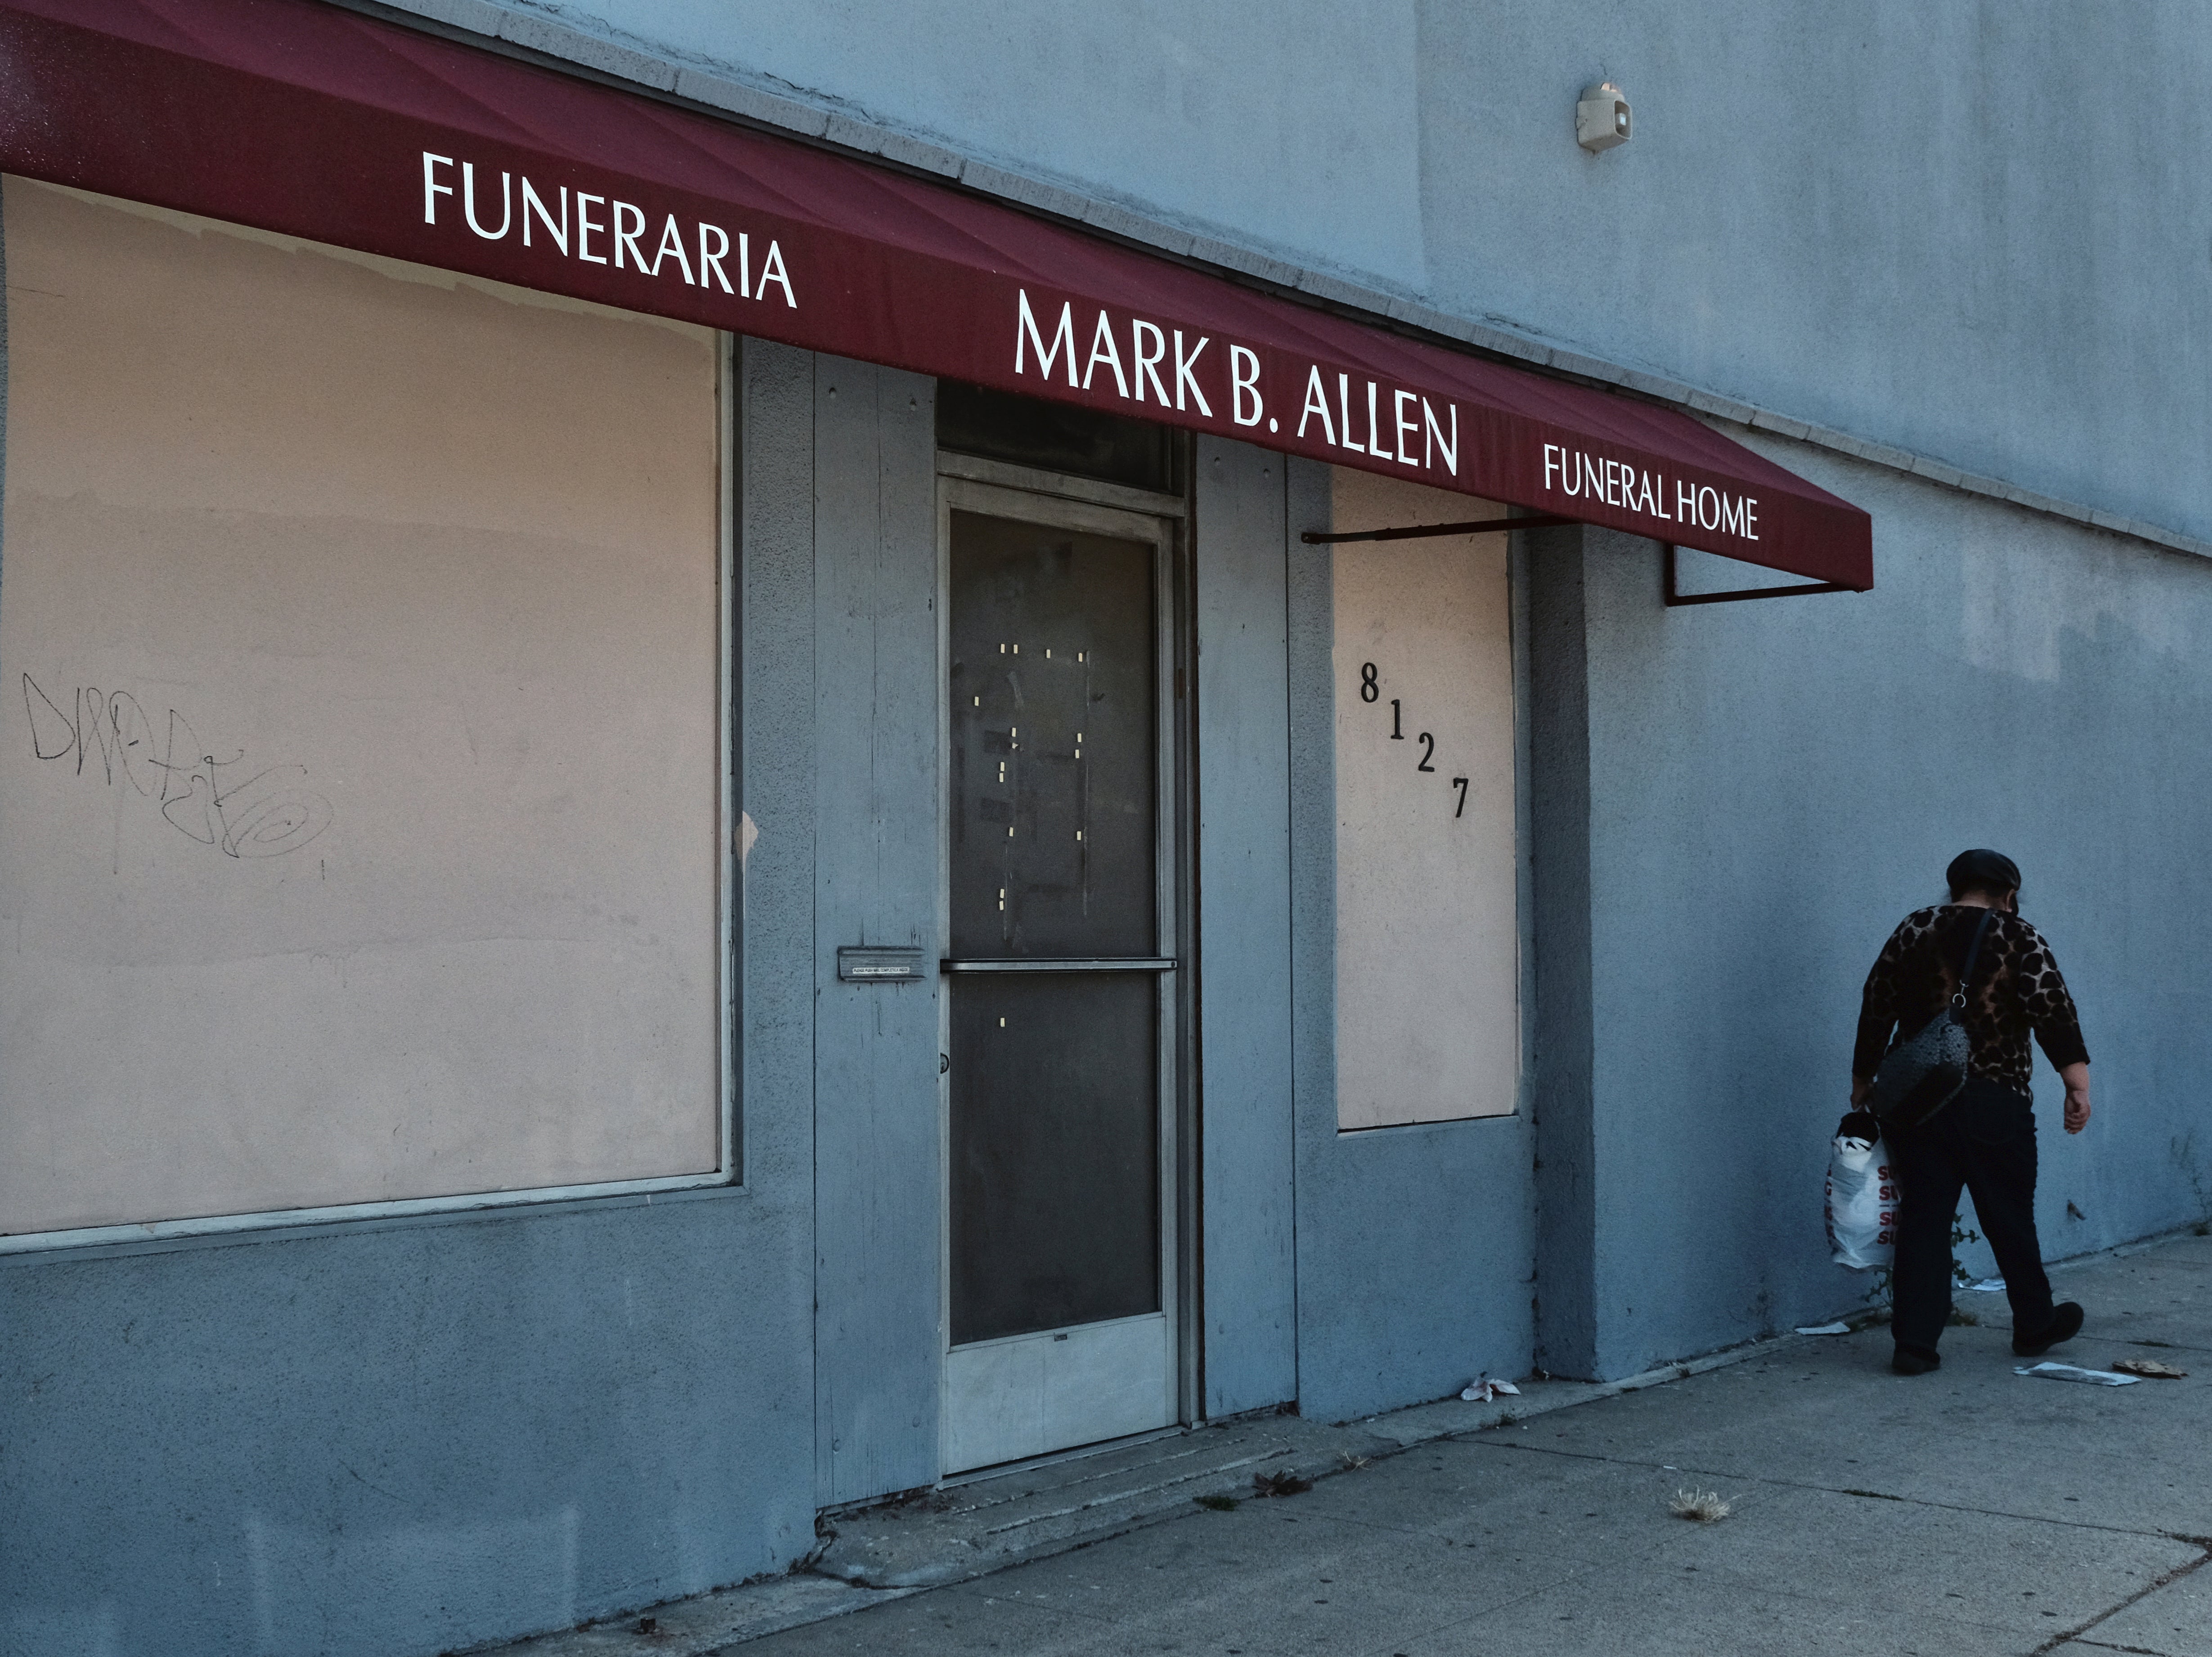 The shuttered funeral home in Los Angeles